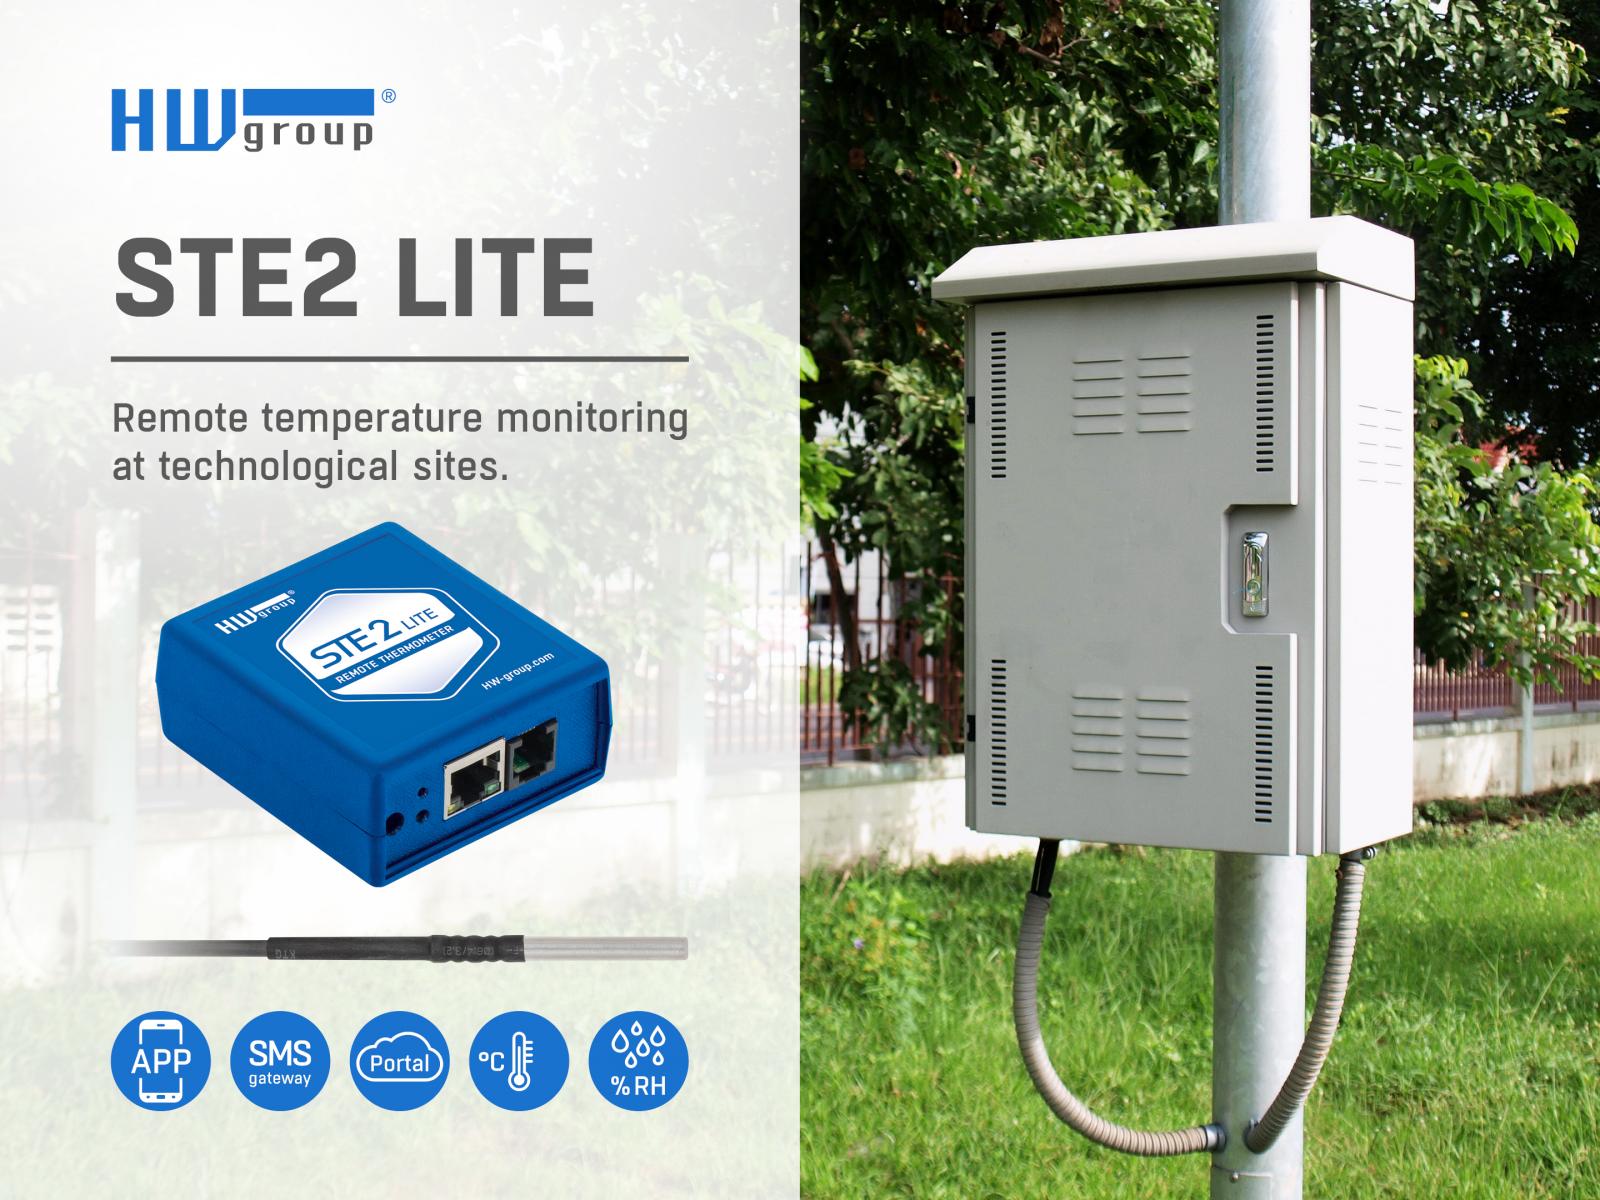 Yeltech's Remote Rail Temperature Monitoring System